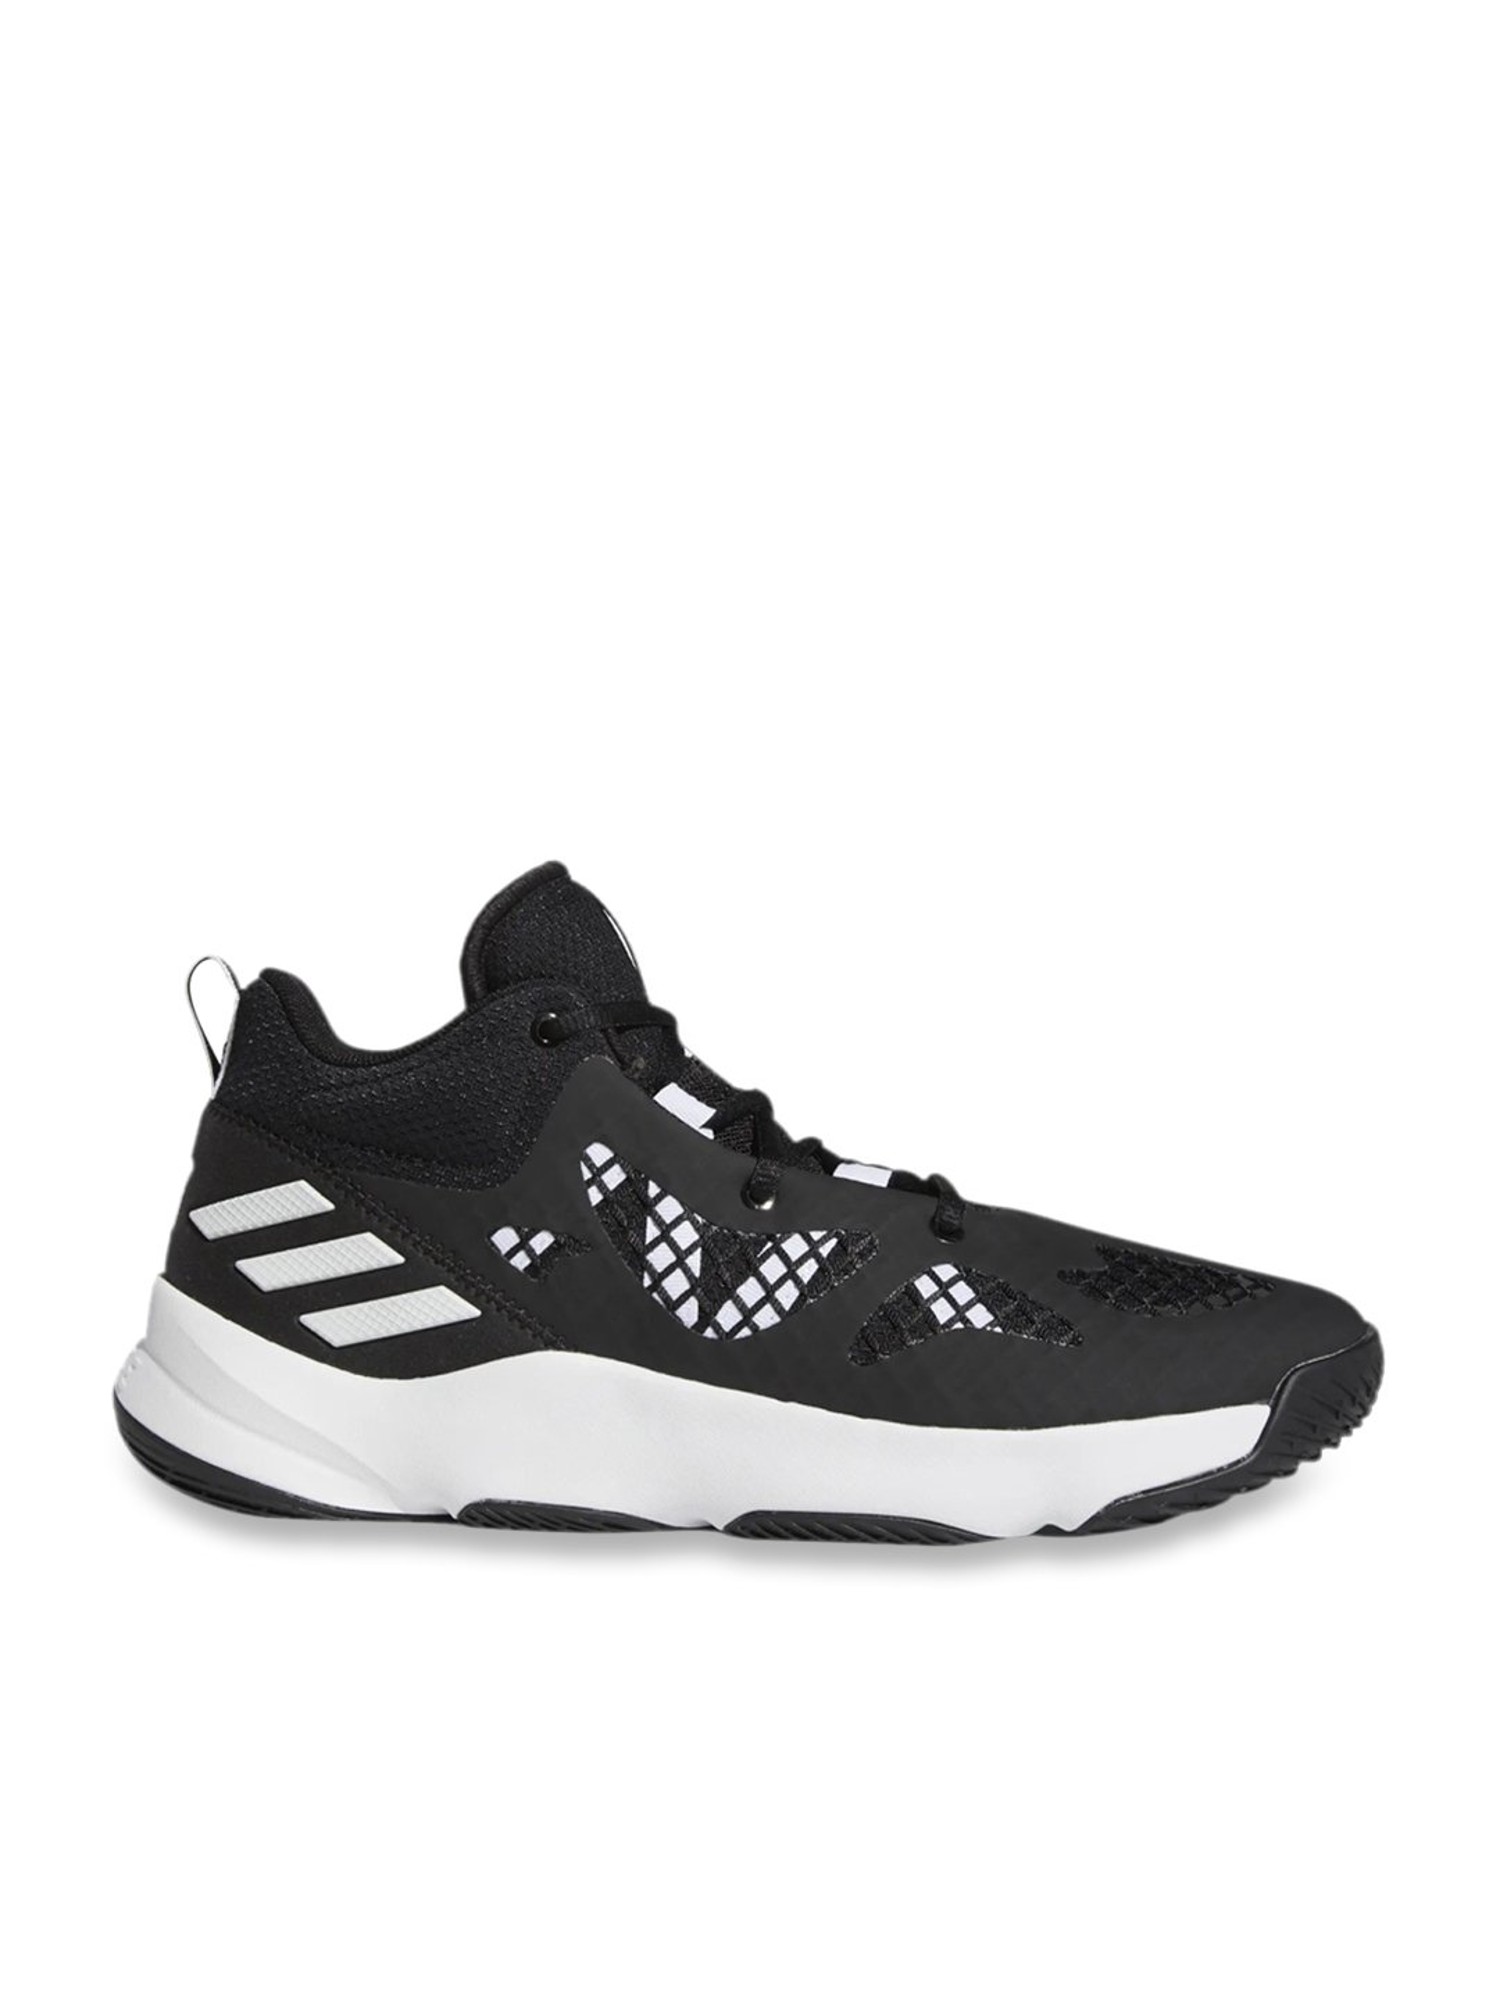 adidas D.O.N. Issue 4 Basketball Shoes | Rebel Sport